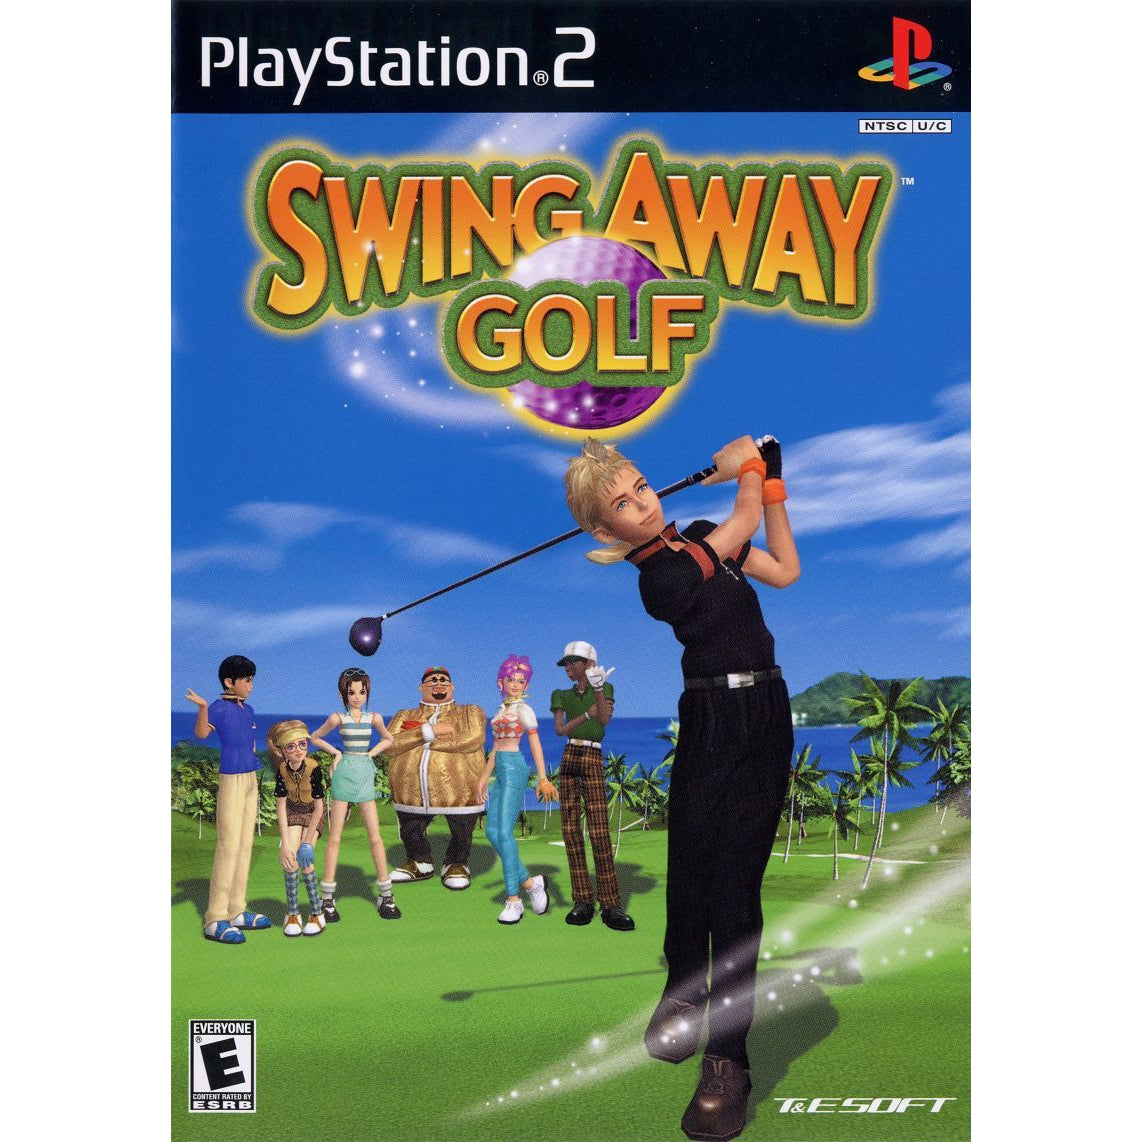 Swing Away Golf - PlayStation 2 (PS2) Game Complete - YourGamingShop.com - Buy, Sell, Trade Video Games Online. 120 Day Warranty. Satisfaction Guaranteed.